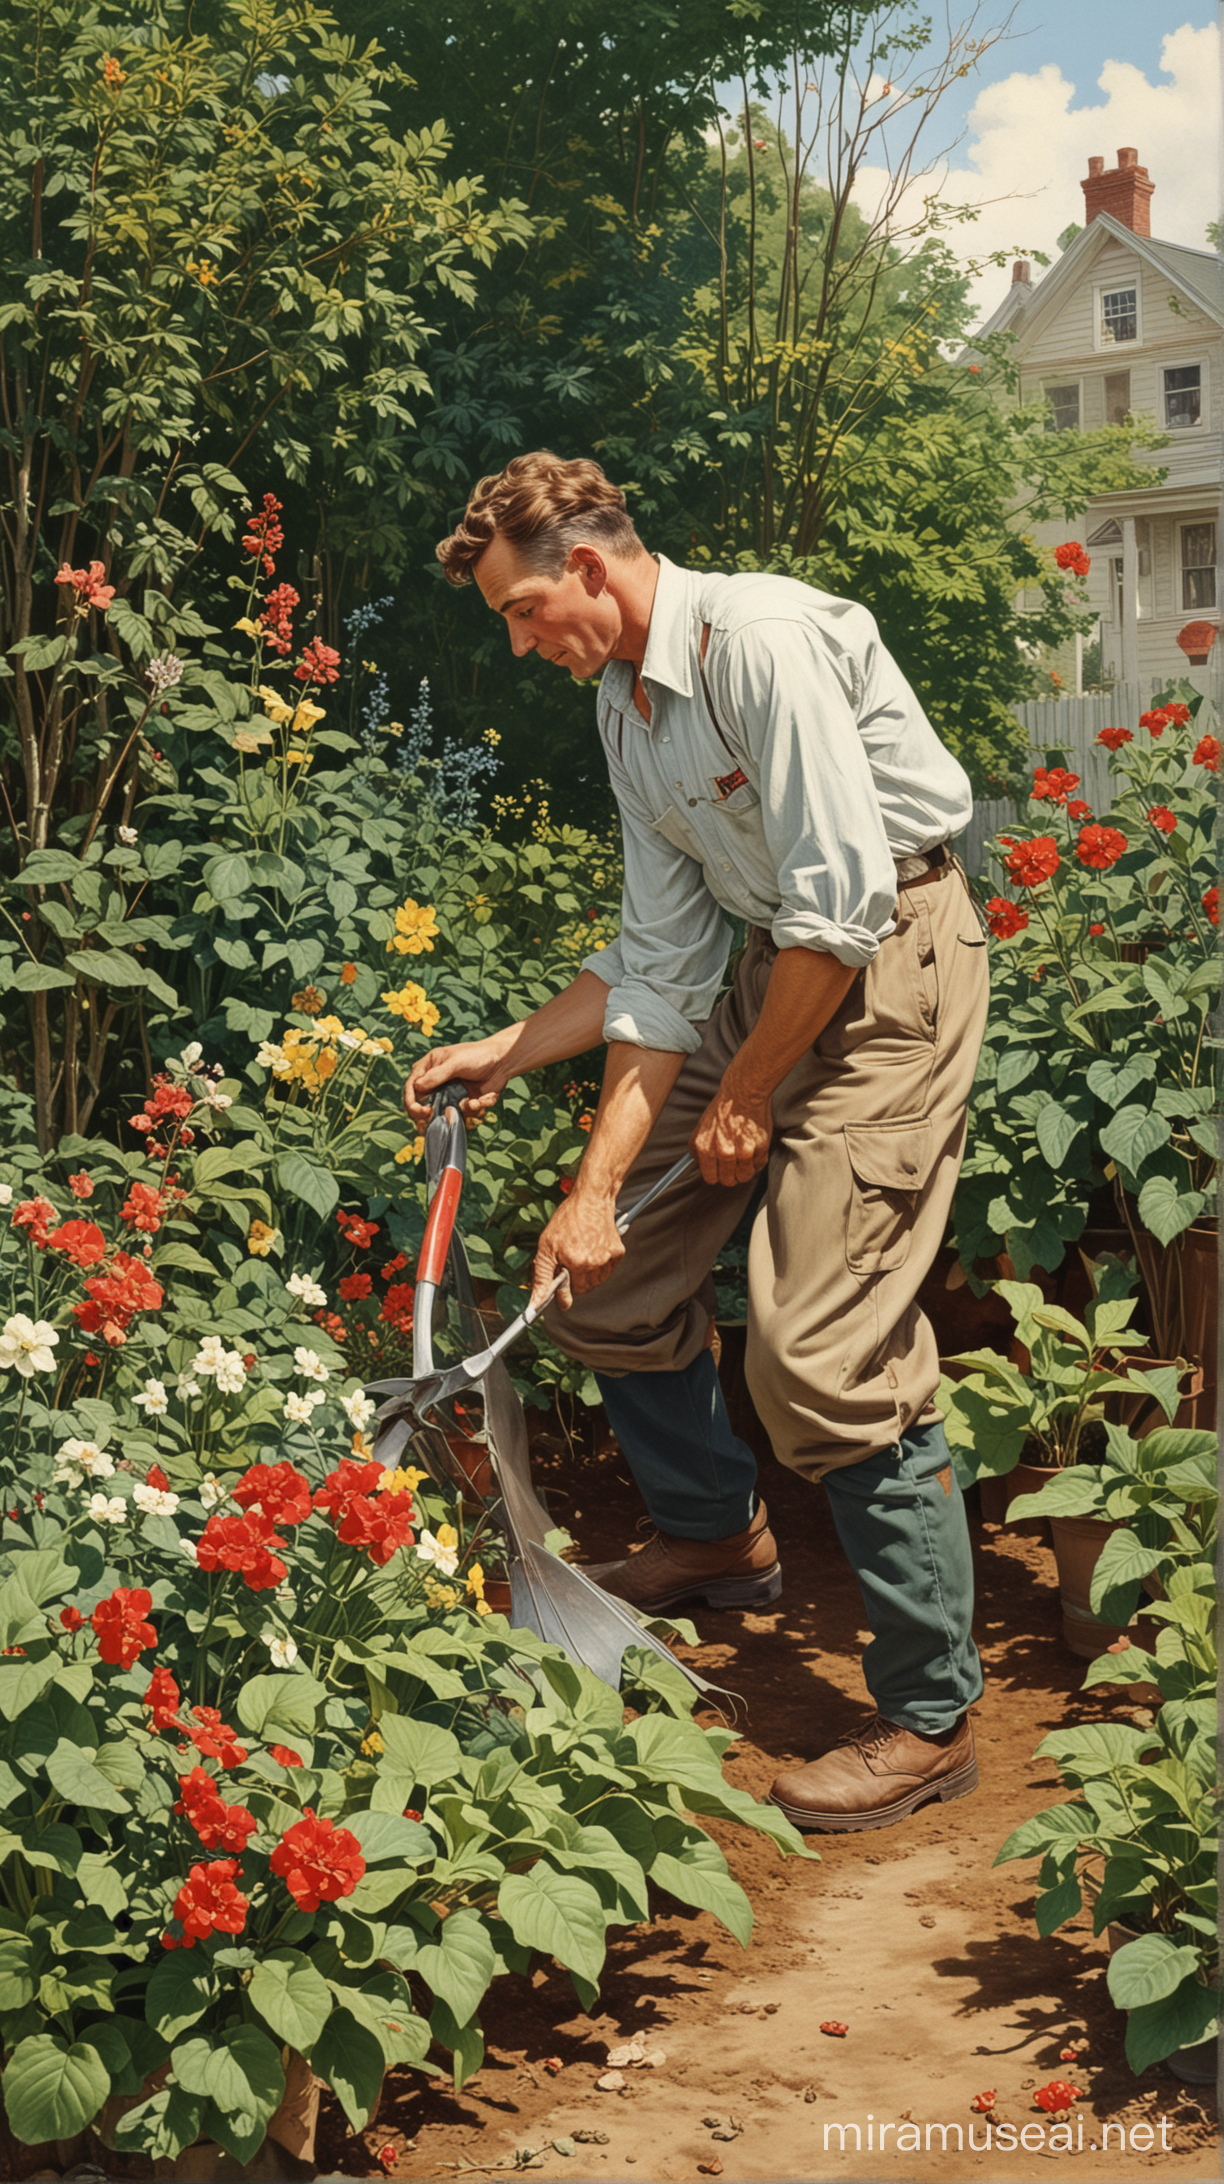 Vintage Horticulturist Working in Norman Rockwell Style